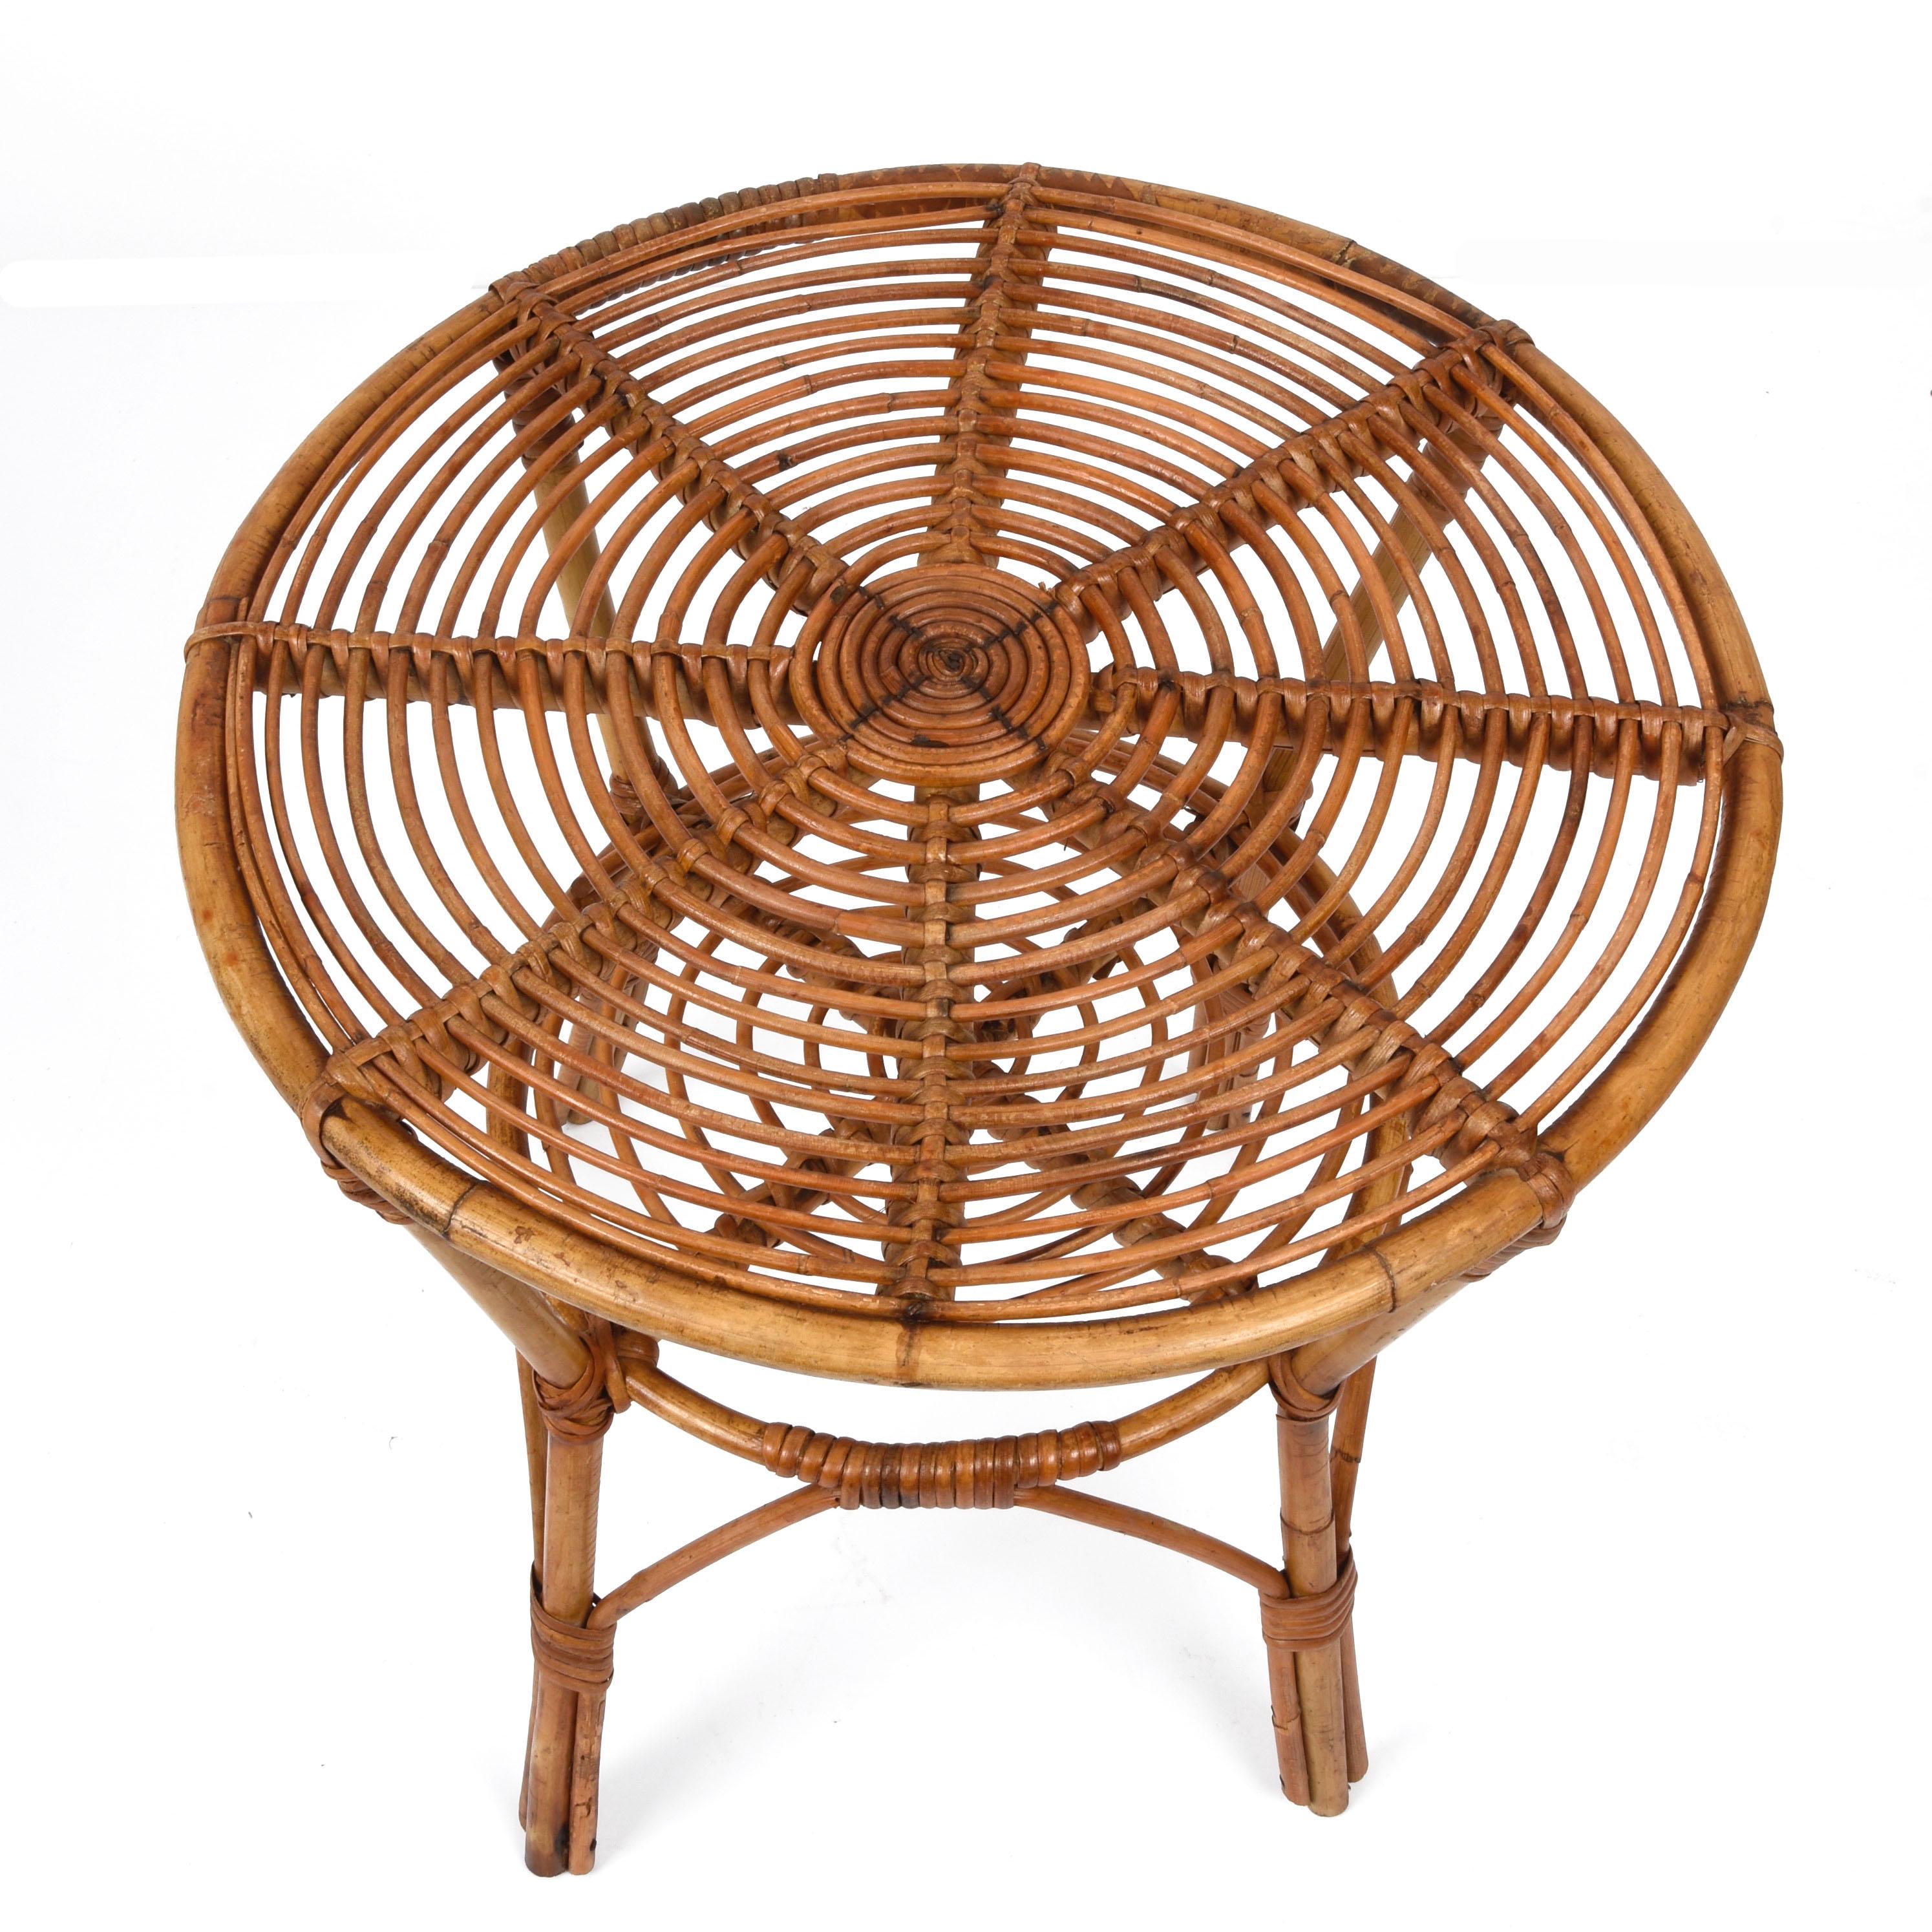 Midcentury Italian Round Rattan and Bamboo Coffee Table with Lower Shelf, 1960s For Sale 3